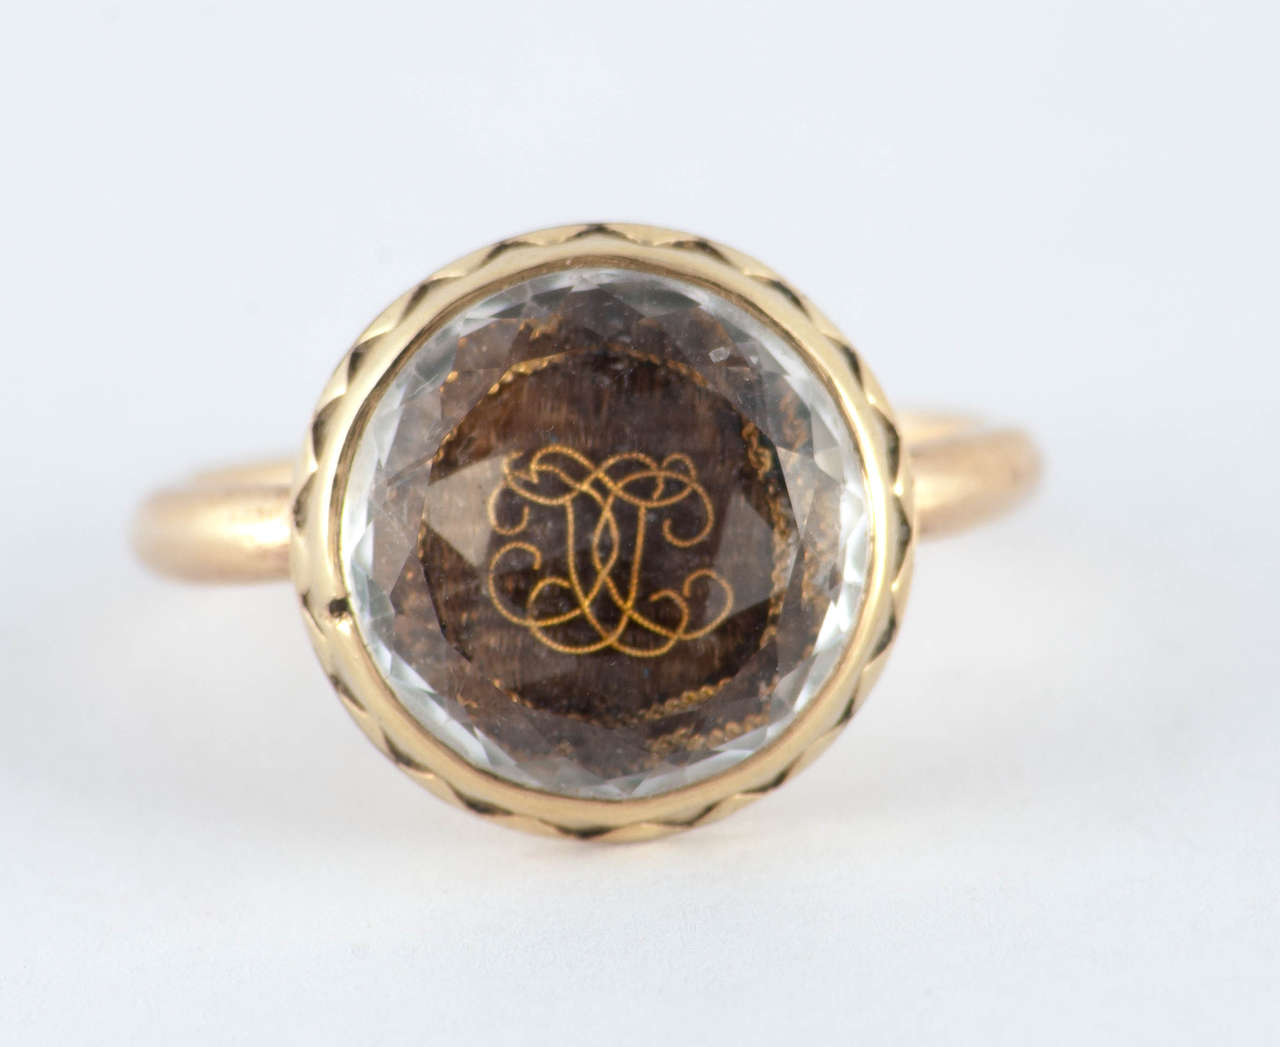 Wonderful early ring from the Stuart period in England. A faceted crystal covers plaited hair adorned by chains of gold and the golden initials 